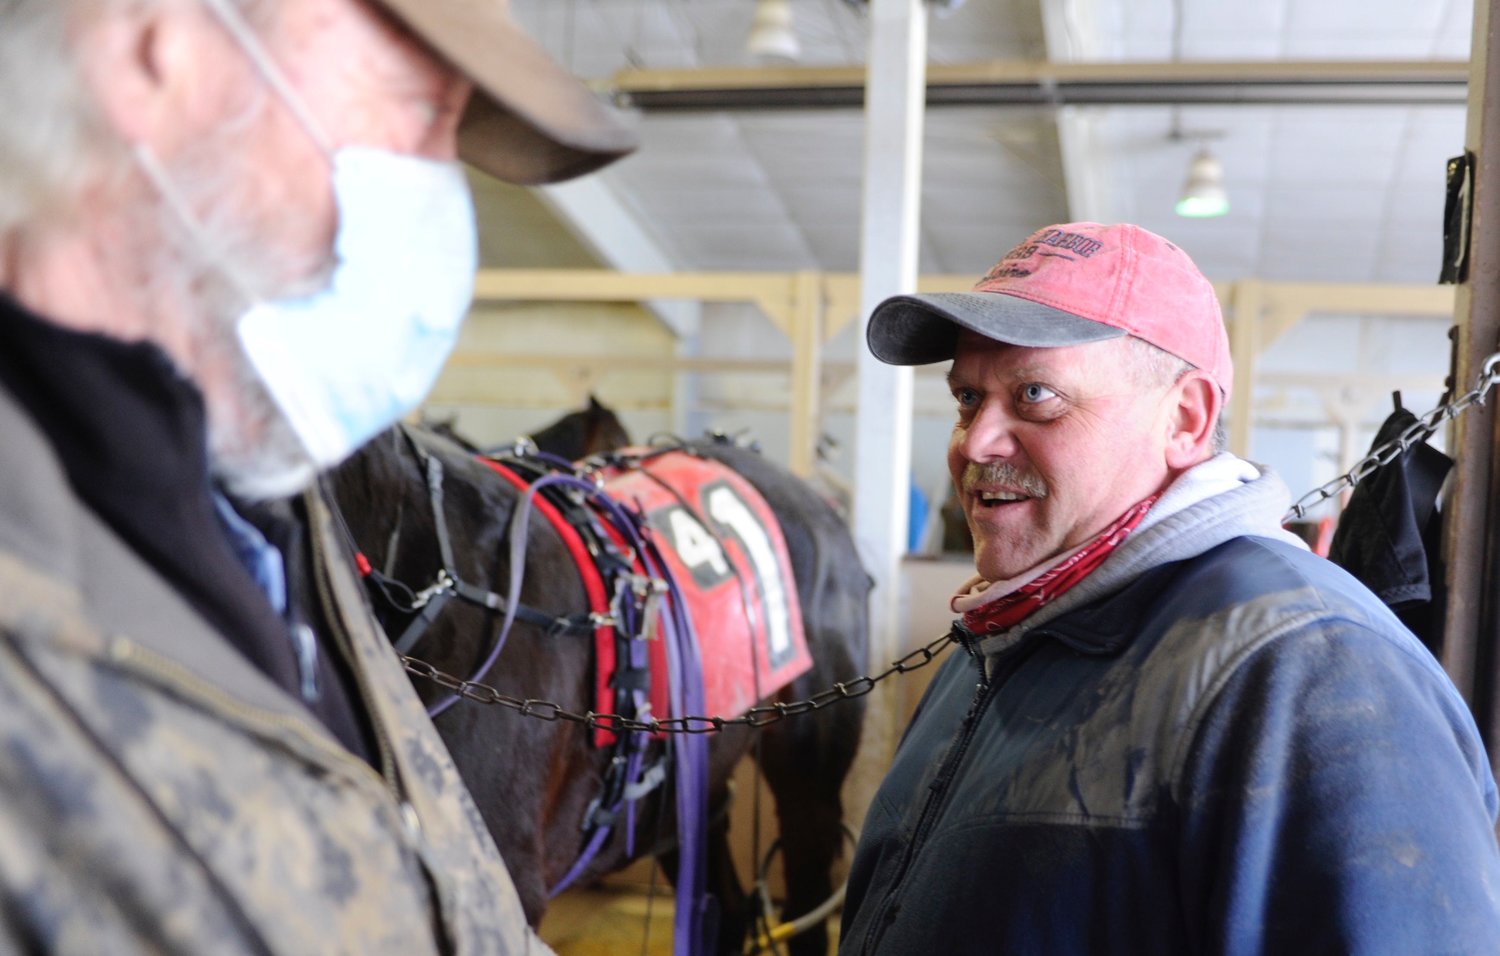 Horse sense. Philip “Bo” Sowers Jr., pictured right, has been in the sport of harness racing since he was five years old. He was just named Monticello Raceway’s 2020 Trainer of the Year. He is pictured with his barn manager Steve Shorey and the horse, I Saw Red...